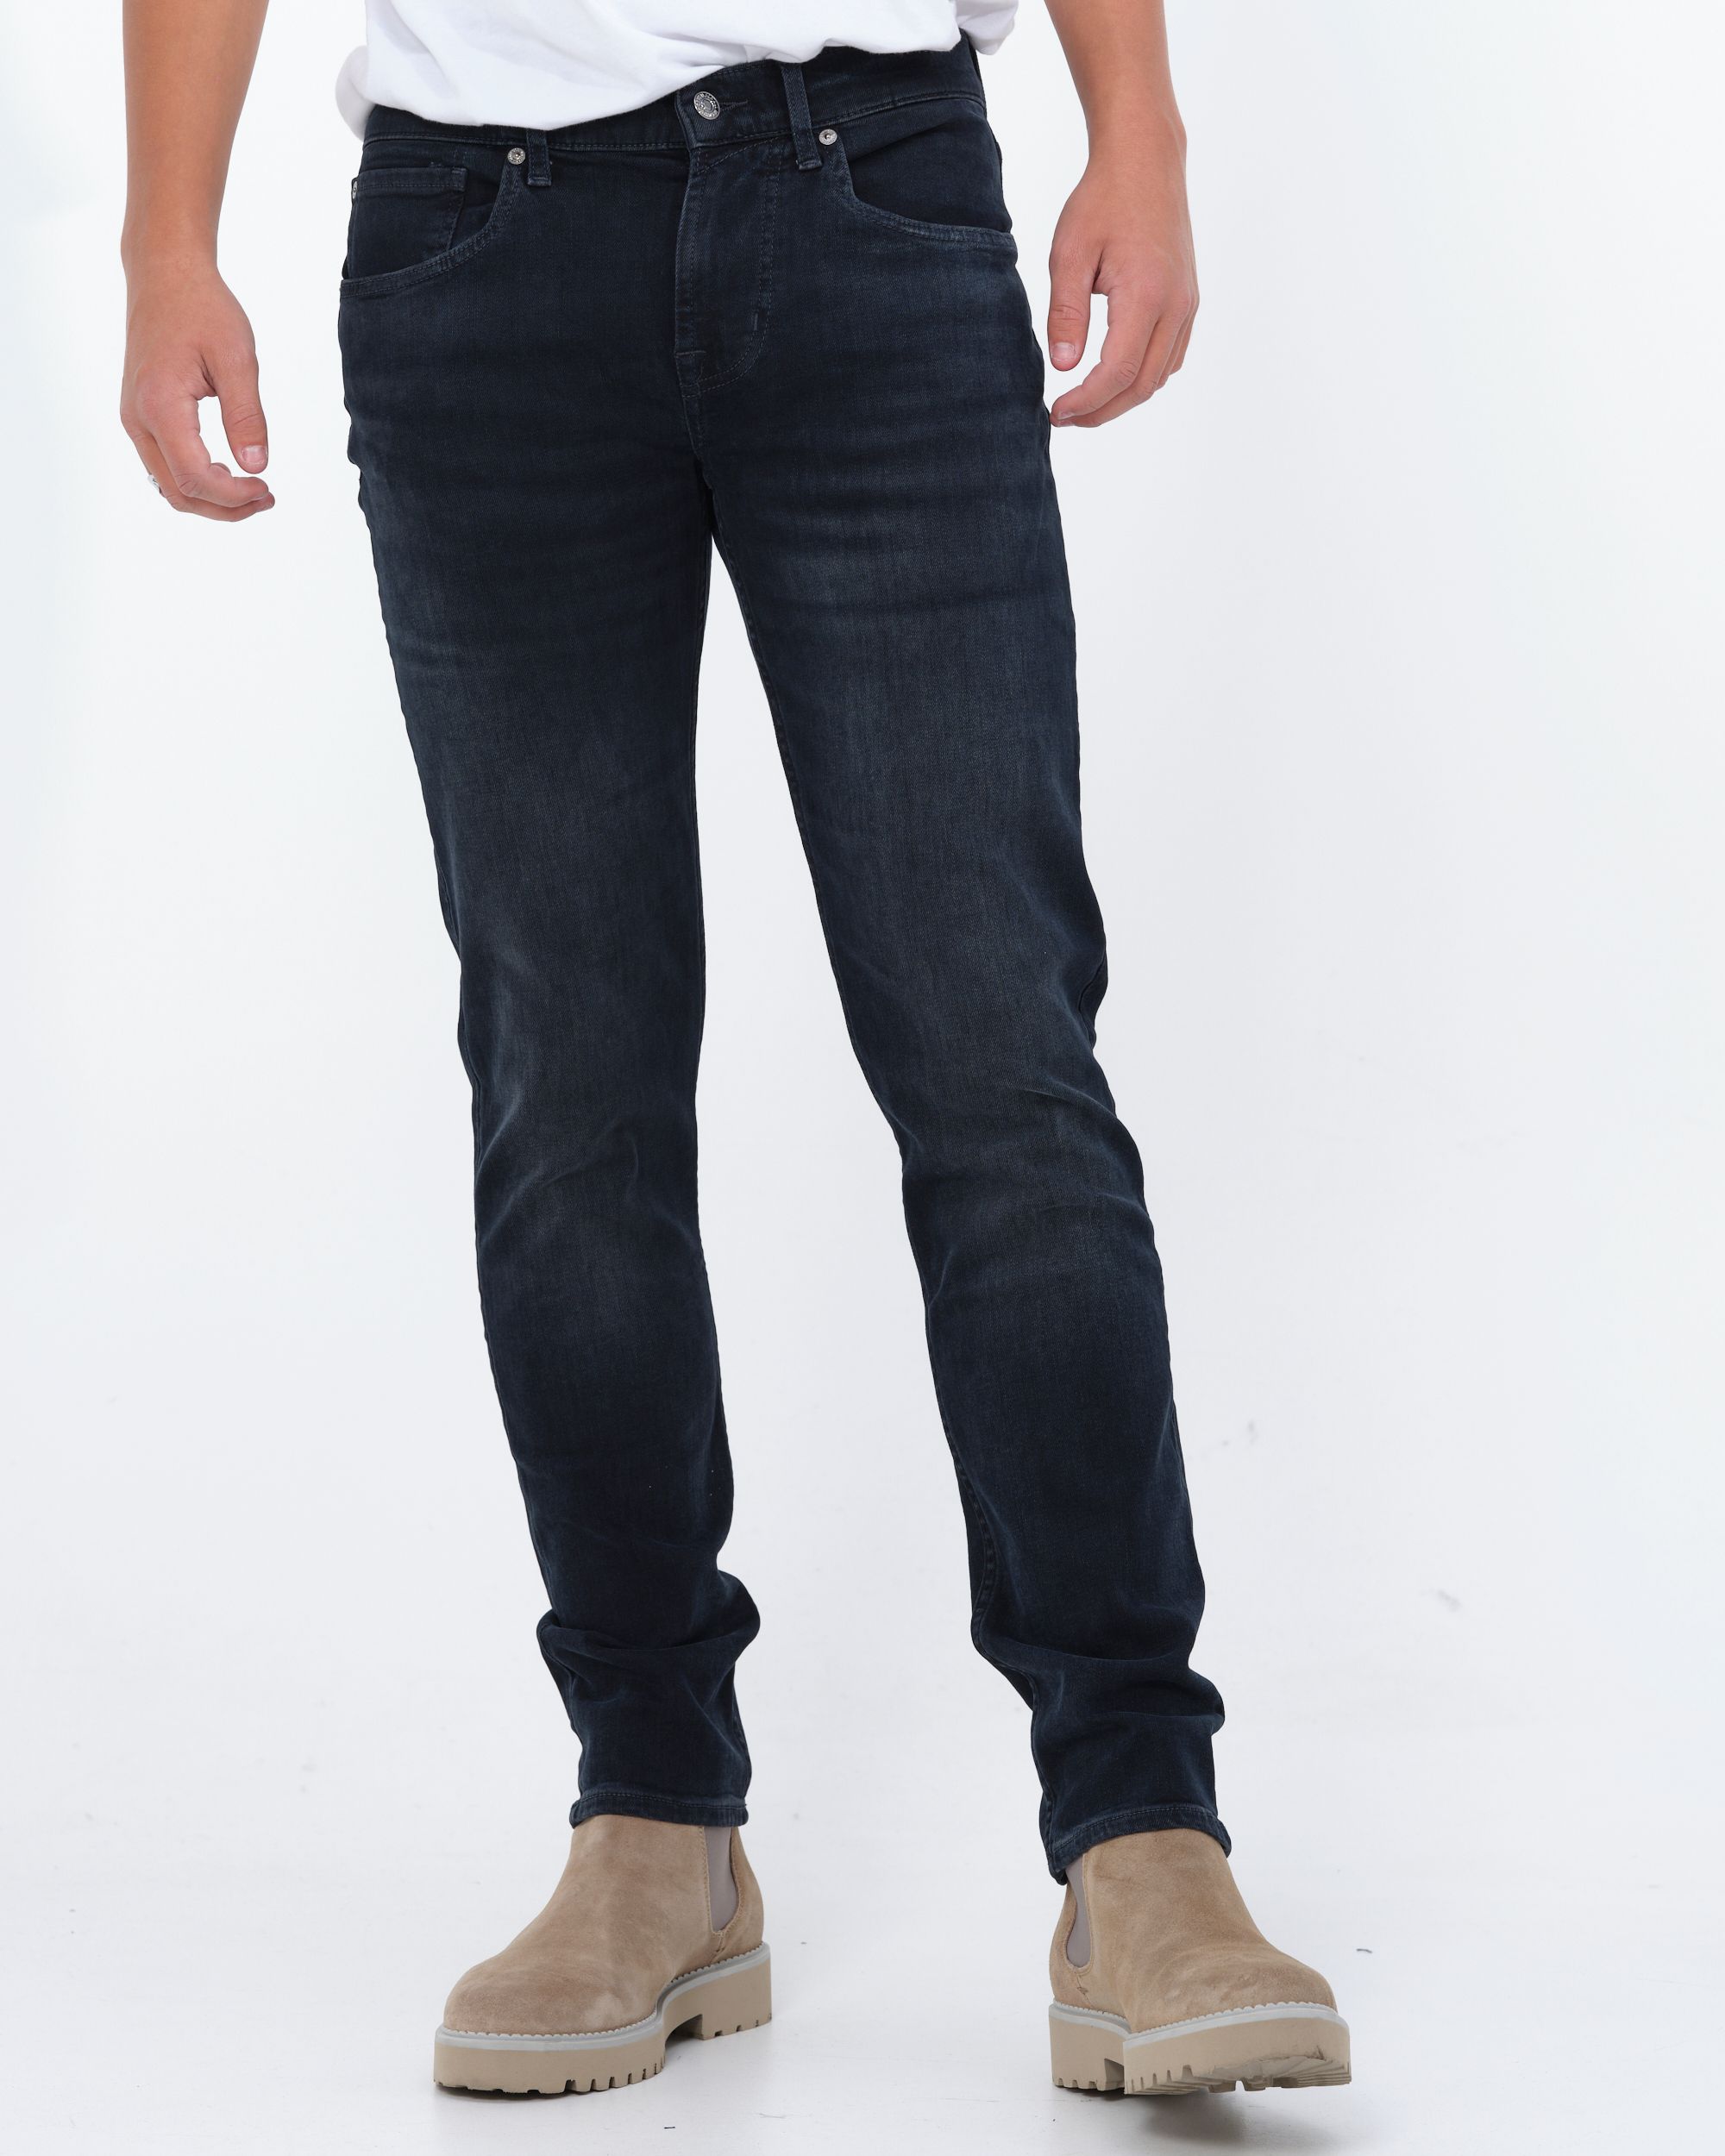 Seven for all mankind Jeans Grijs 081446-001-30